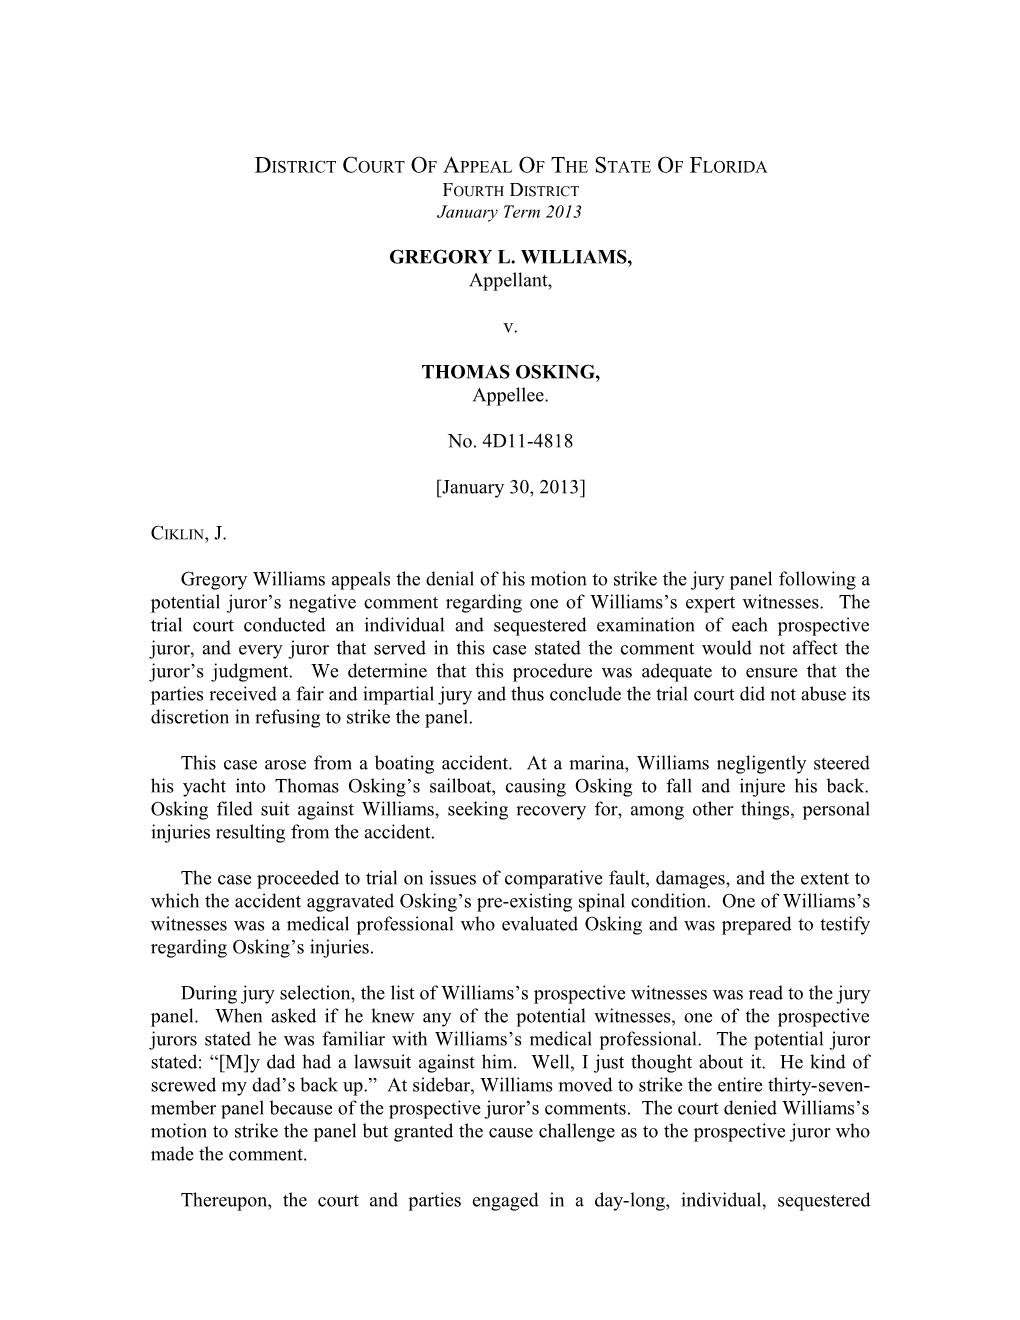 District Court of Appeal of the State of Florida s3